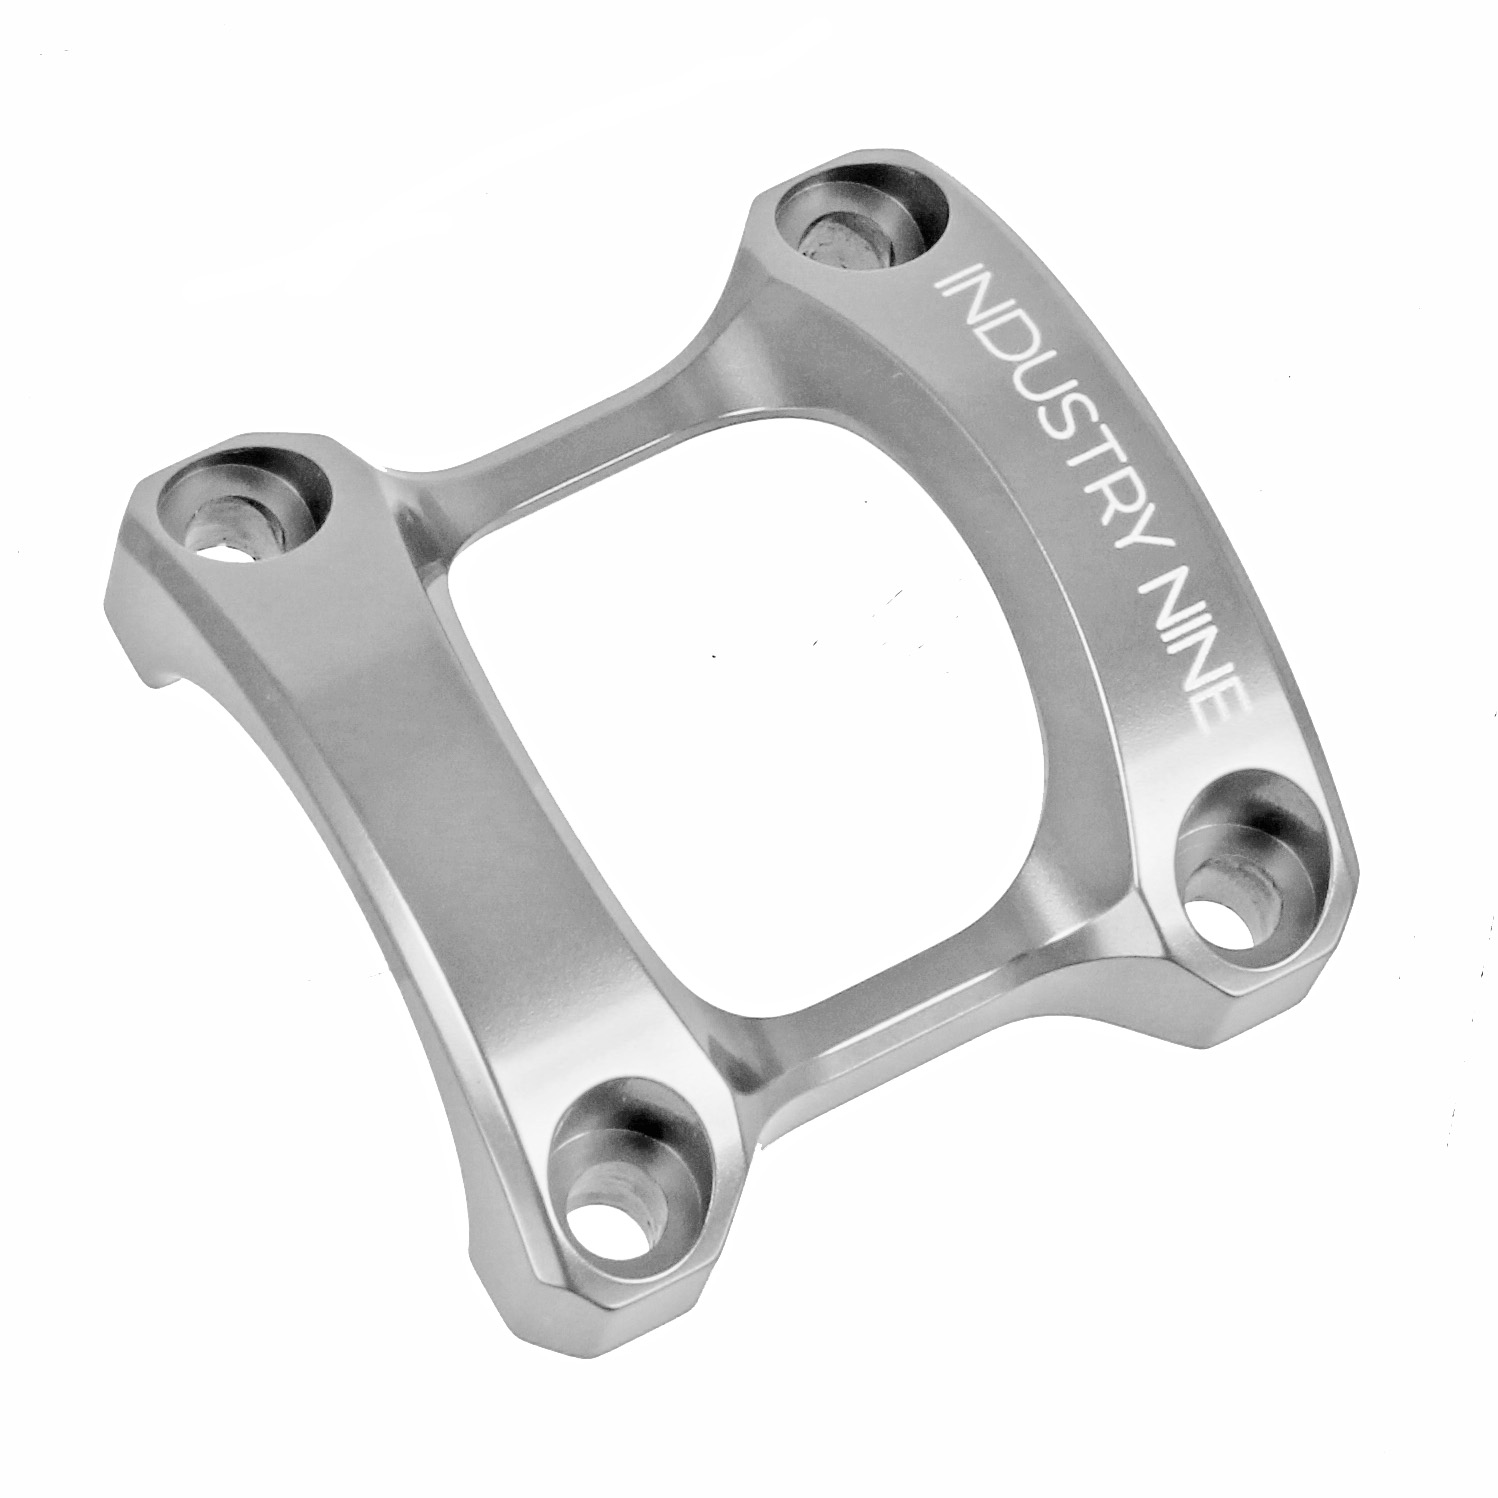 Industry Nine A35 Stem Faceplate, Silver